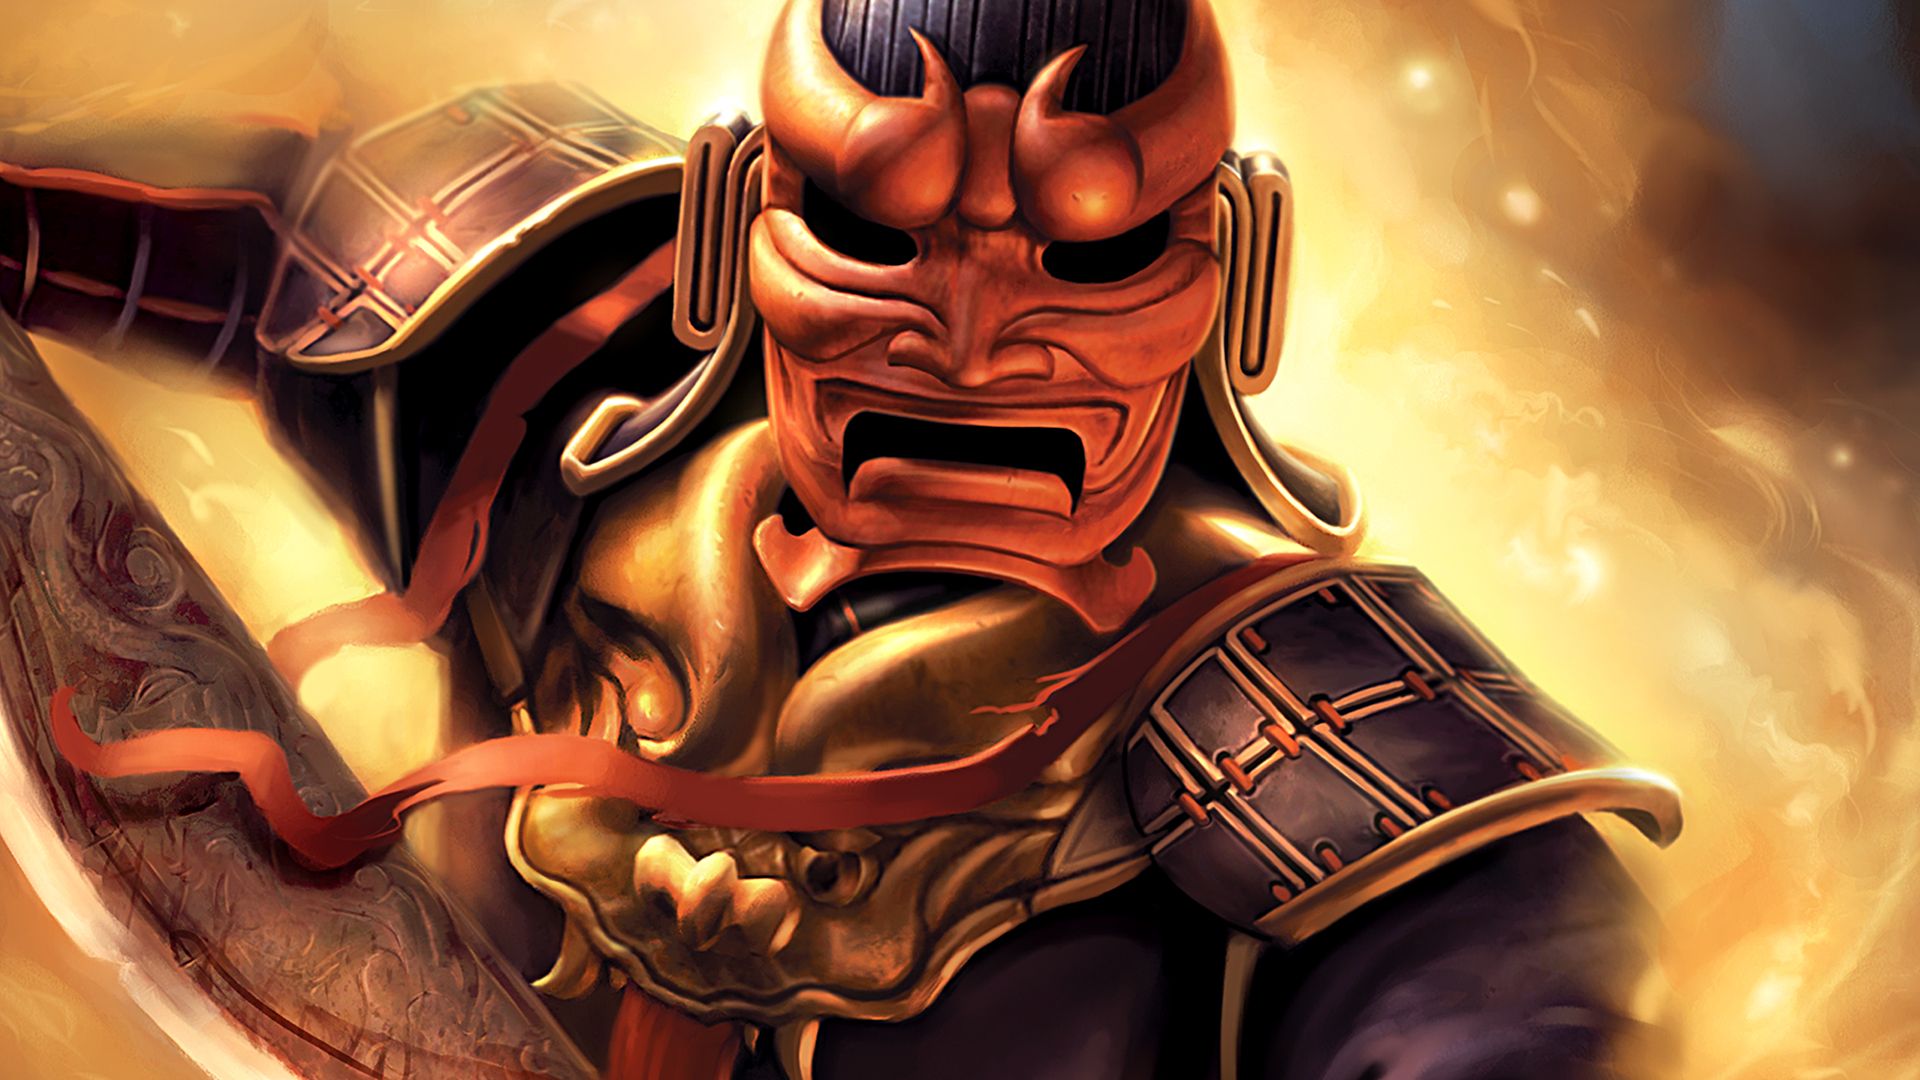 Amazing Jade Empire Pictures & Backgrounds